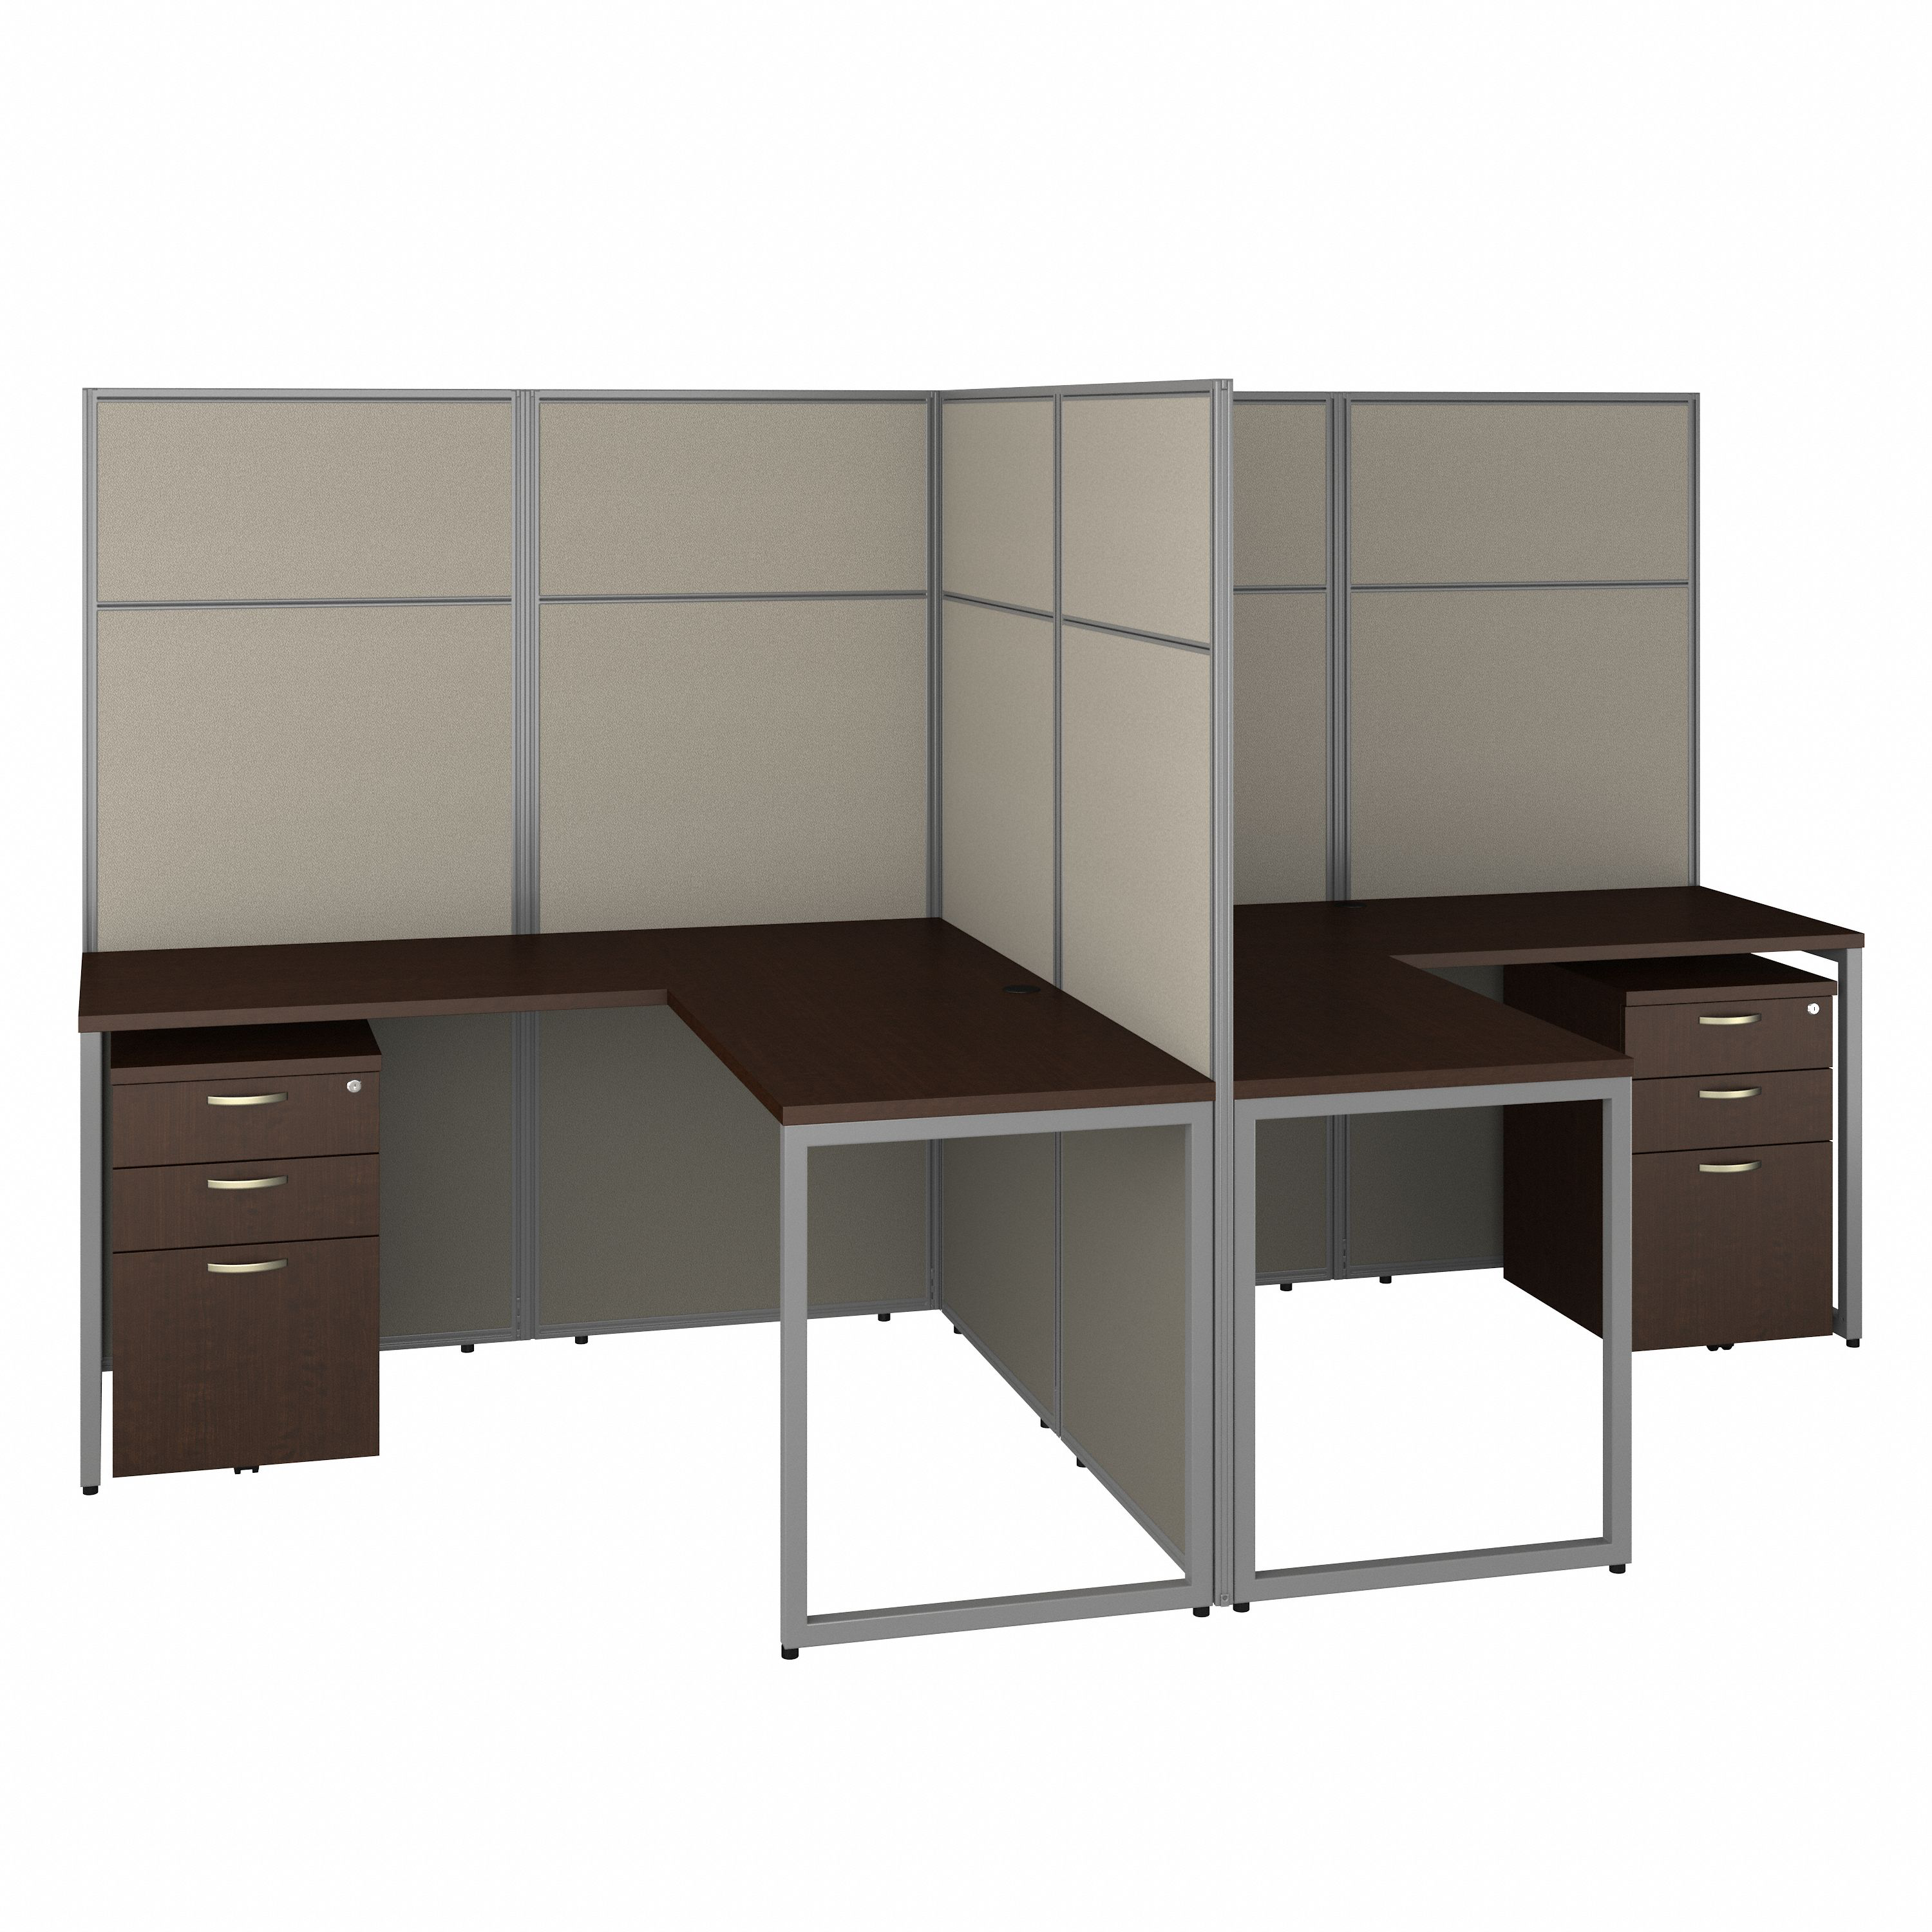 Shop Bush Business Furniture Easy Office 60W 2 Person L Shaped Cubicle Desk with Drawers and 66H Panels 02 EODH56SMR-03K #color_mocha cherry